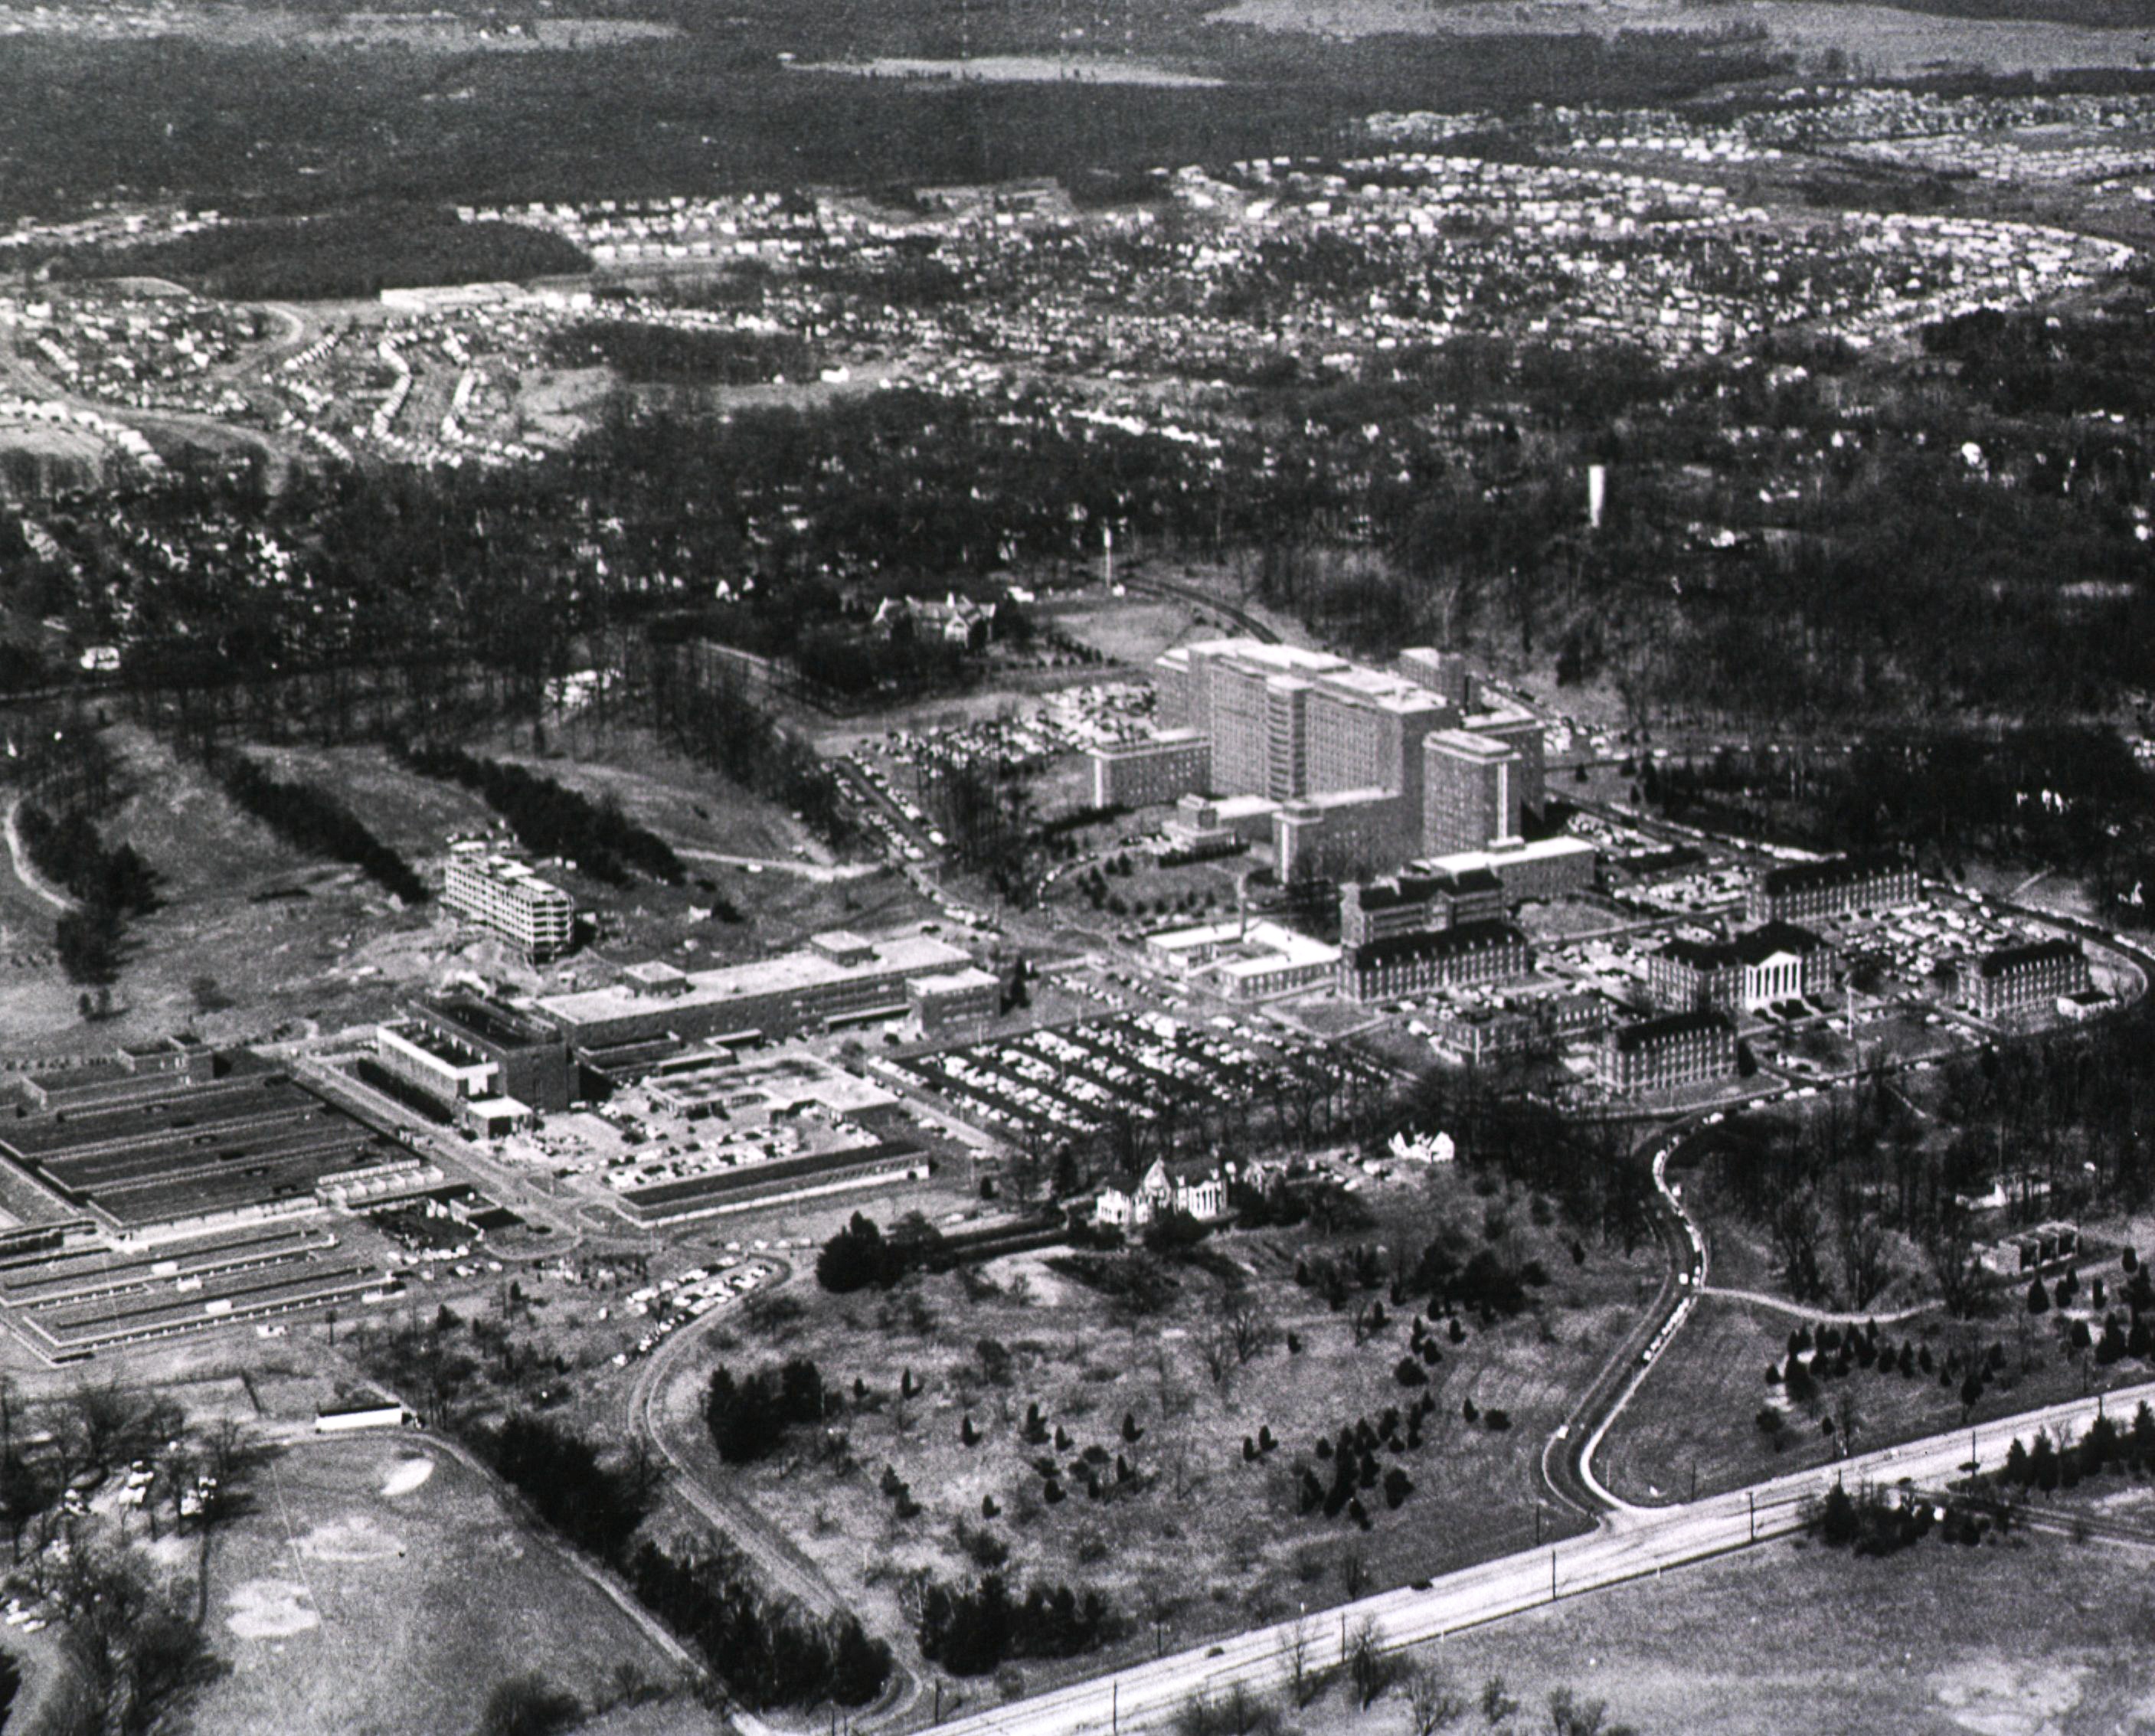 Aerial Image of the NIH campus taken in 1960